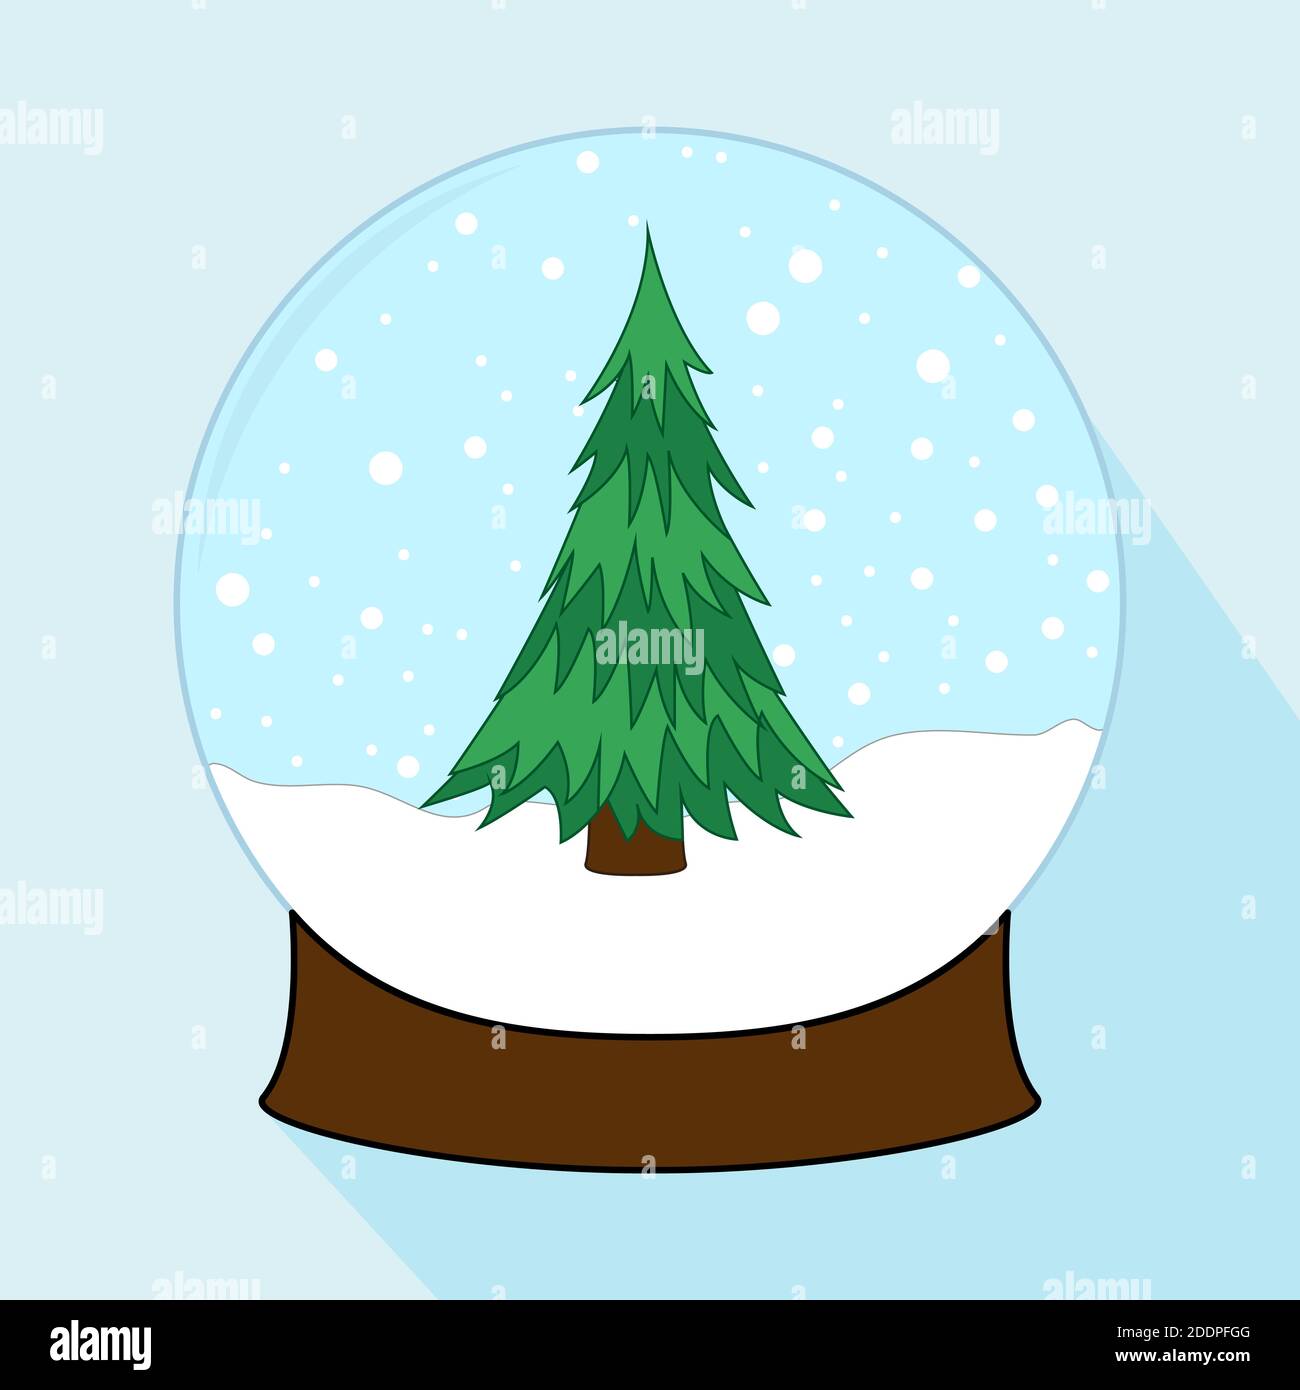 Christmas decoration, crystal ball. Christmas snowball with Christmas tree and snowflakes. Holiday symbol isolated on blue background in flat design. Stock Vector